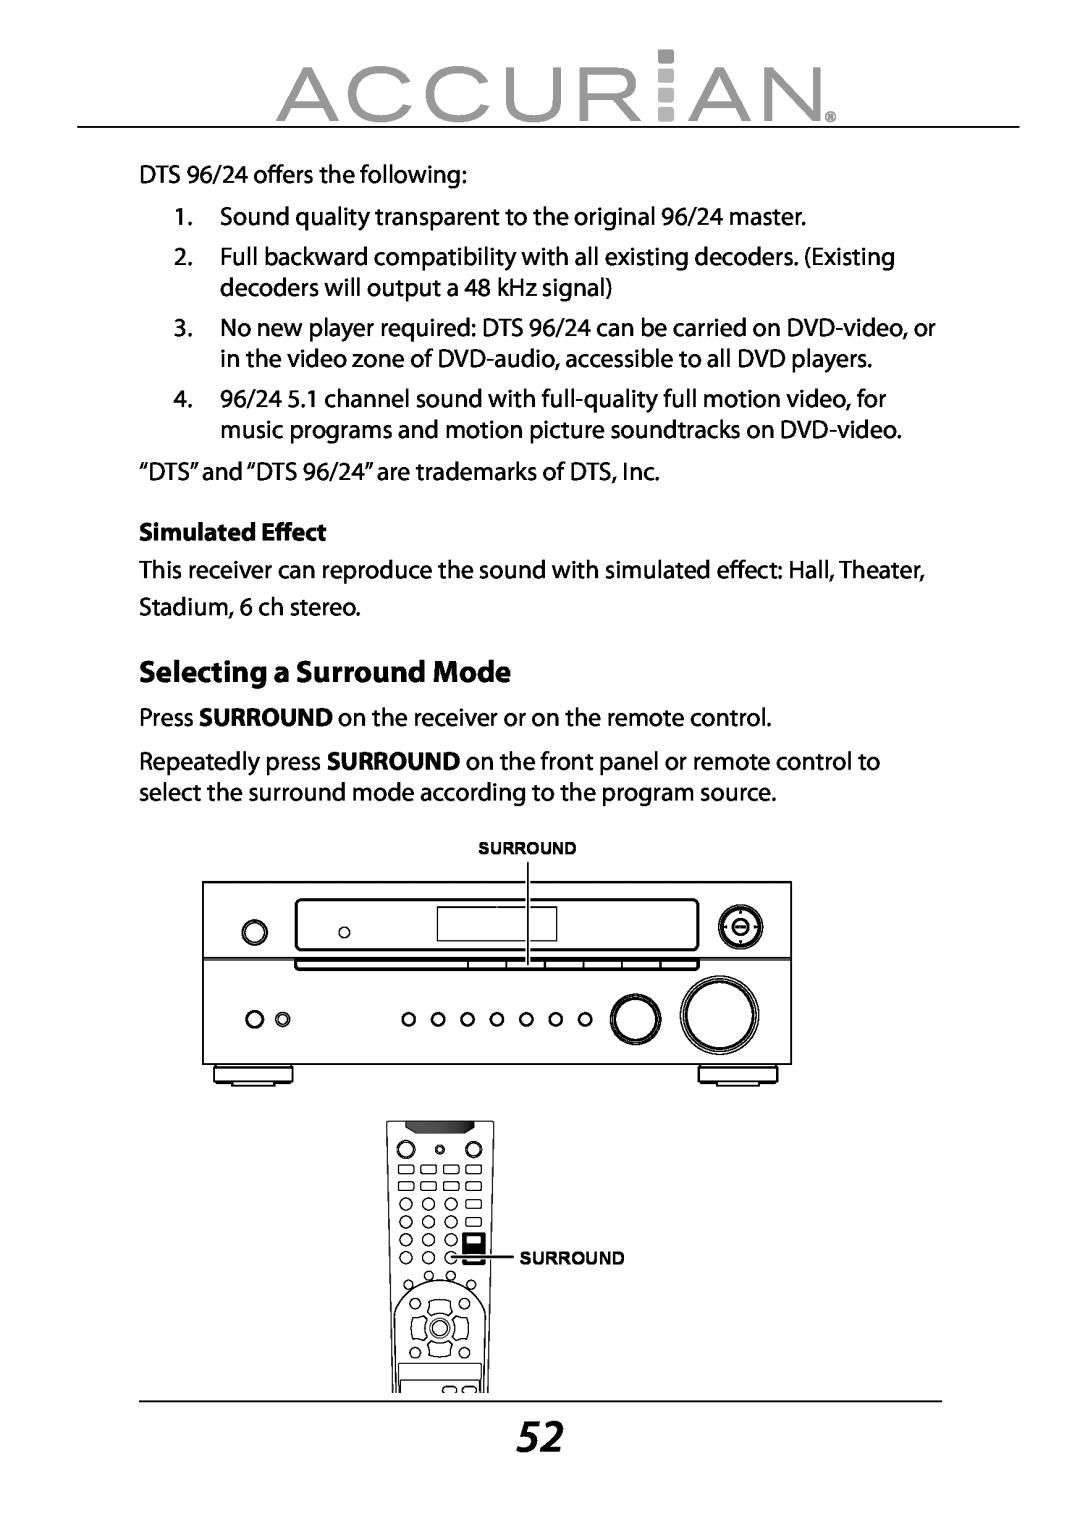 Sirius Satellite Radio 6.1ch Sirius-Ready A/V Surround Receiver manual Selecting a Surround Mode, Simulated Eﬀect 